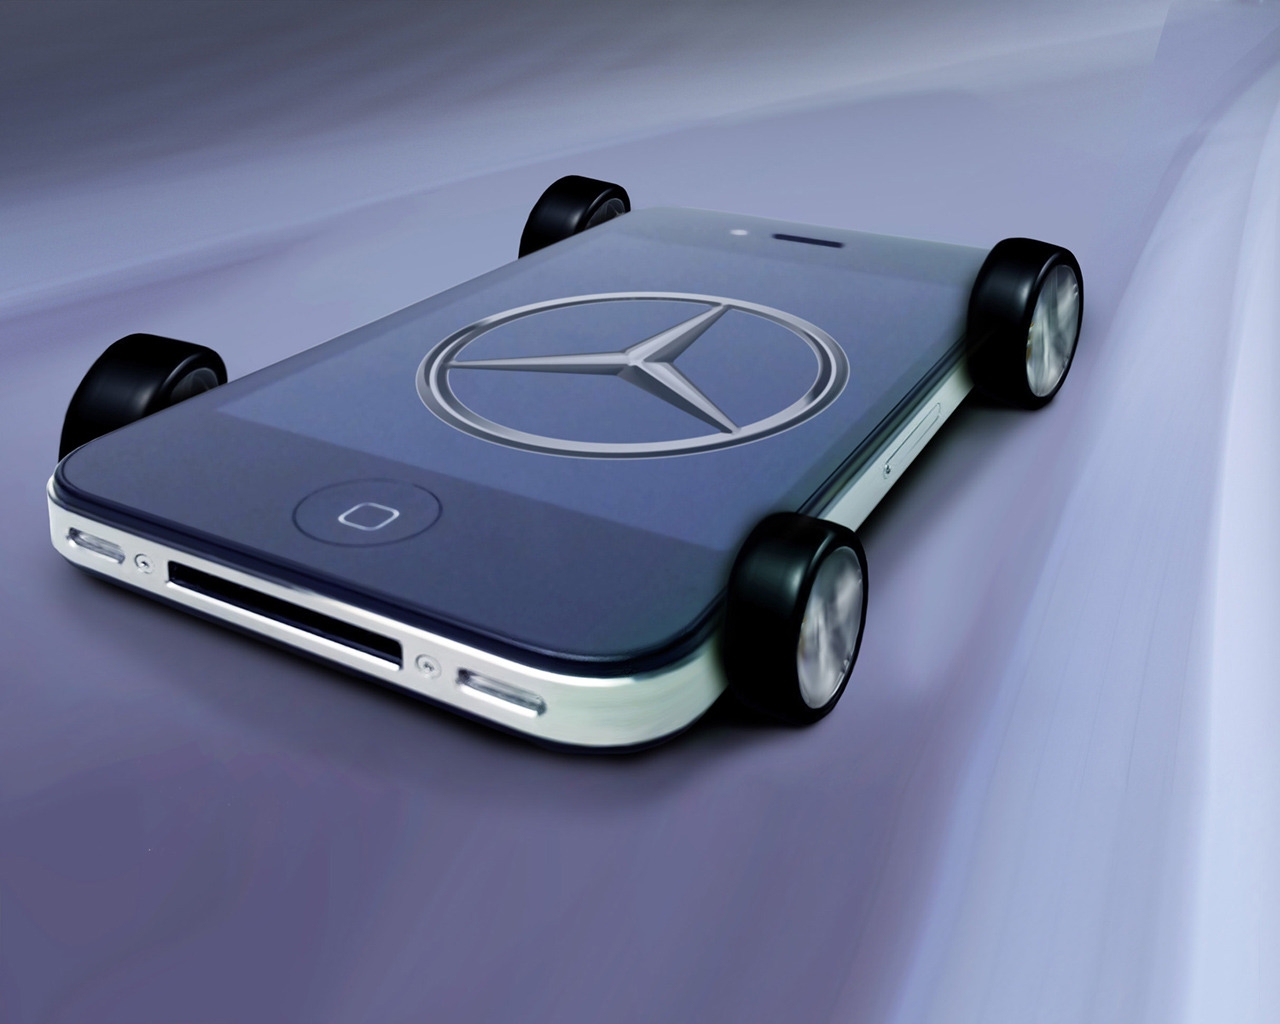 Mercedes Benz iPhone for 1280 x 1024 resolution